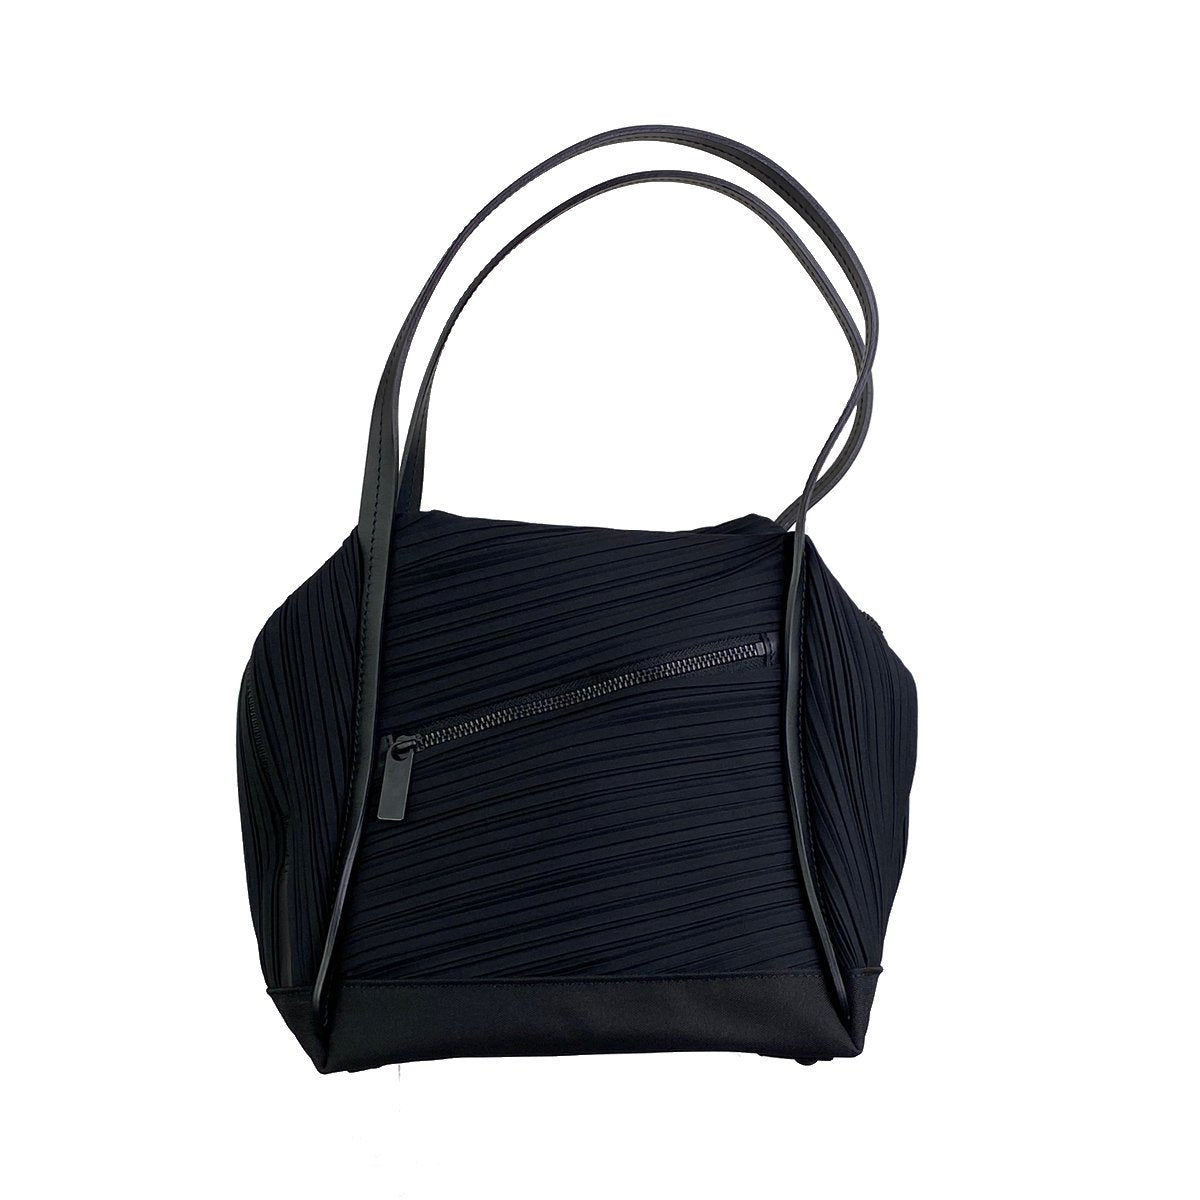 PLEATS PLEASE ISSEY MIYAKE Bags - Women - 19 products